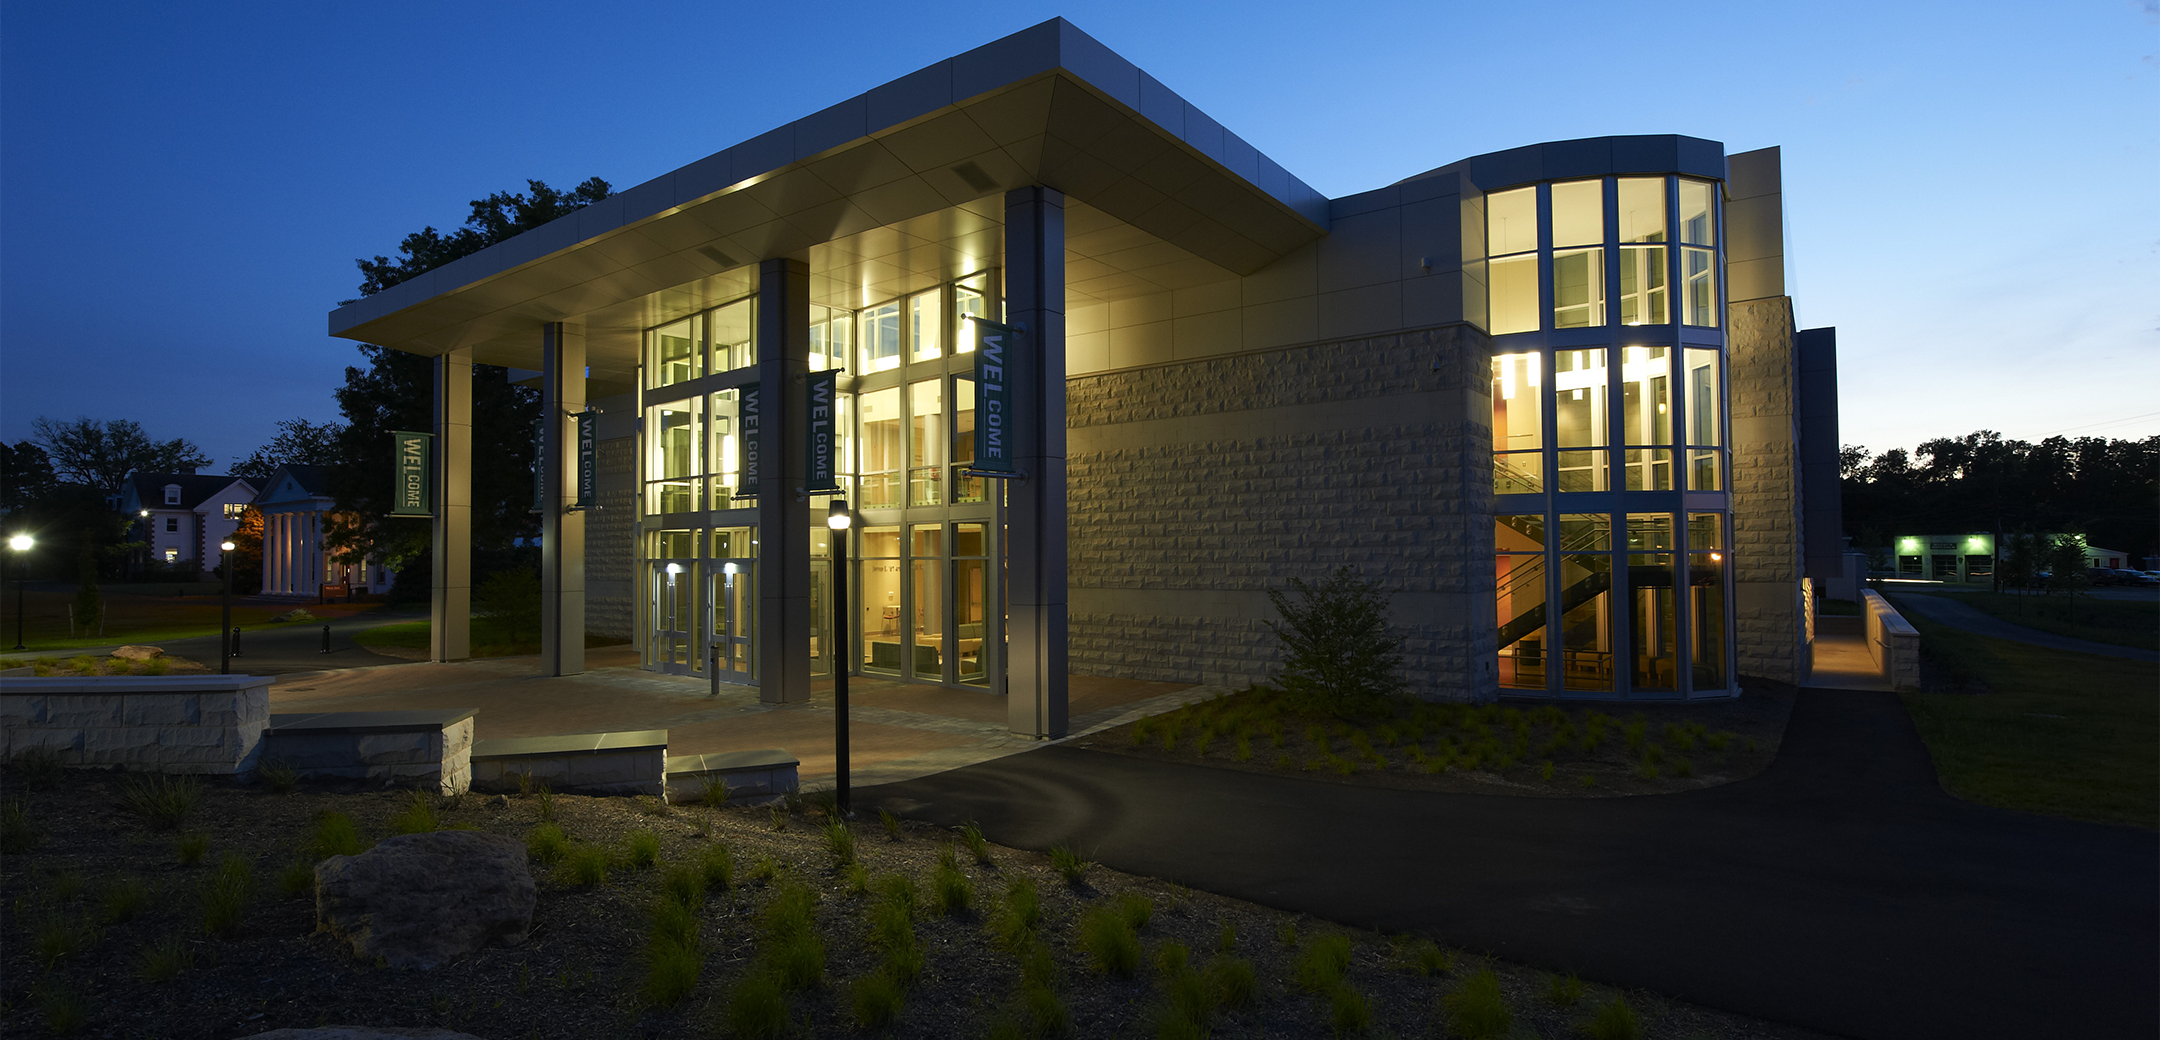 An angled night image of the Delaware Valley College building showcasing the front side of the building, entrance and driveway.